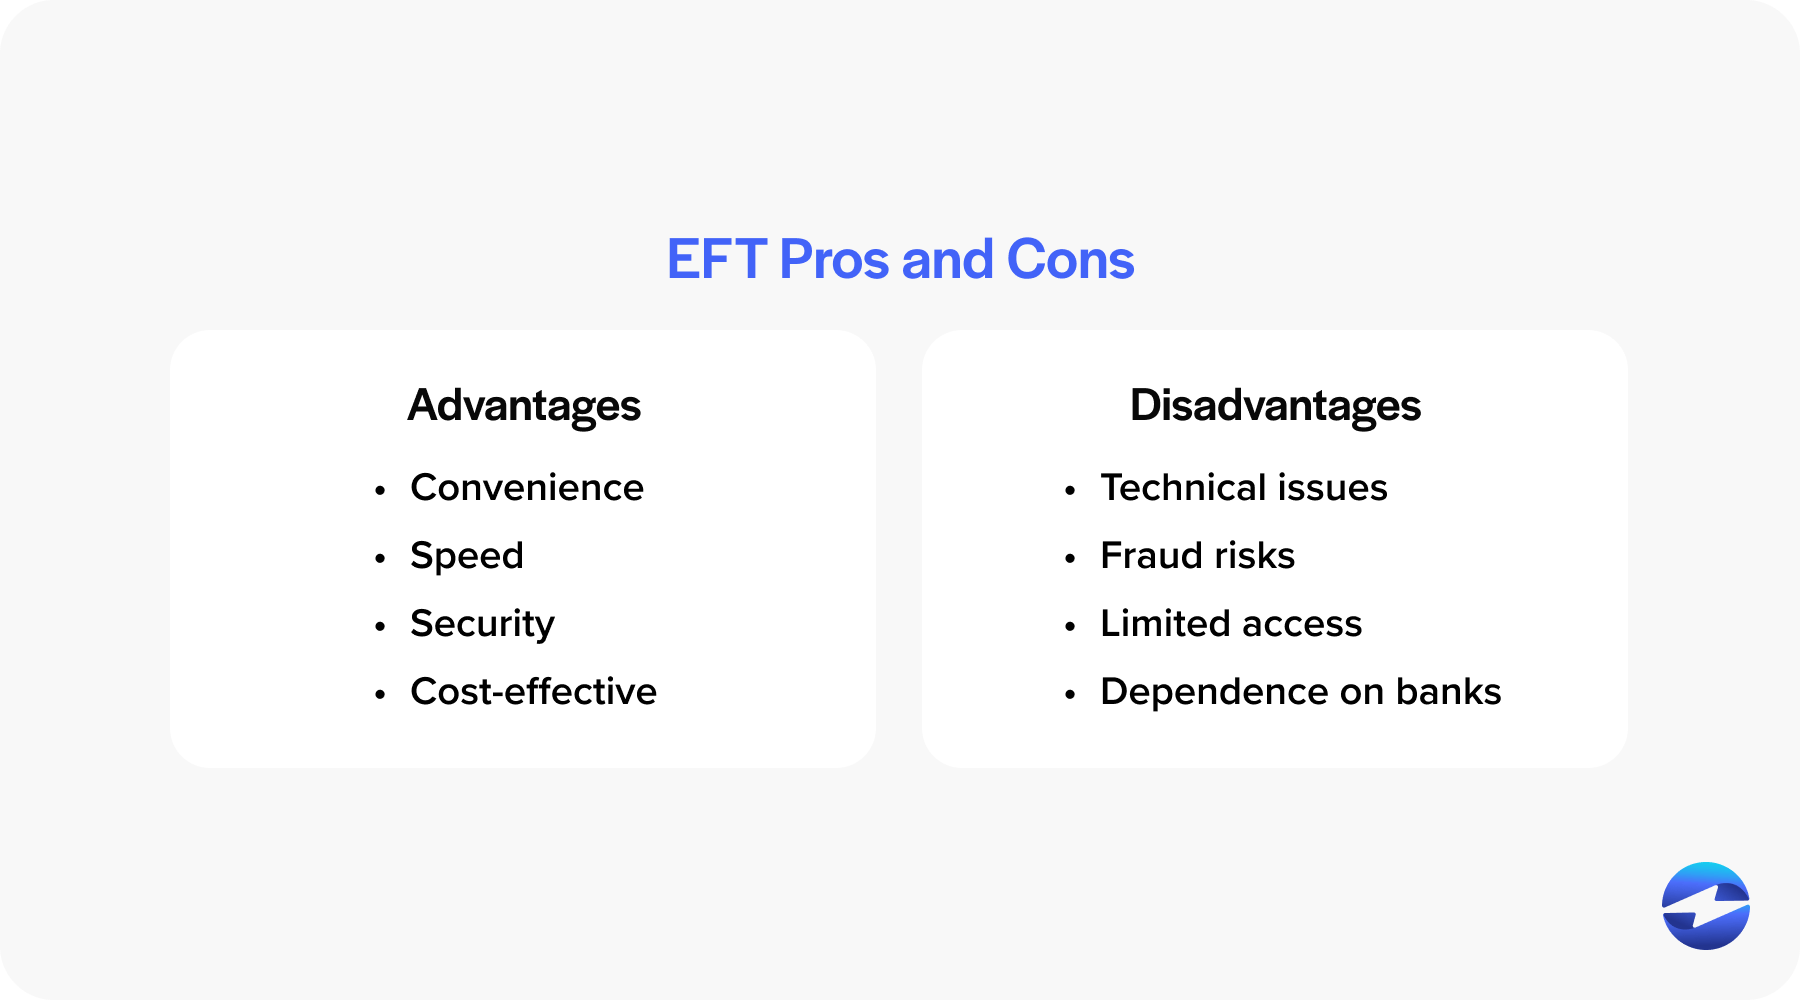 pros and cons of an eft payment